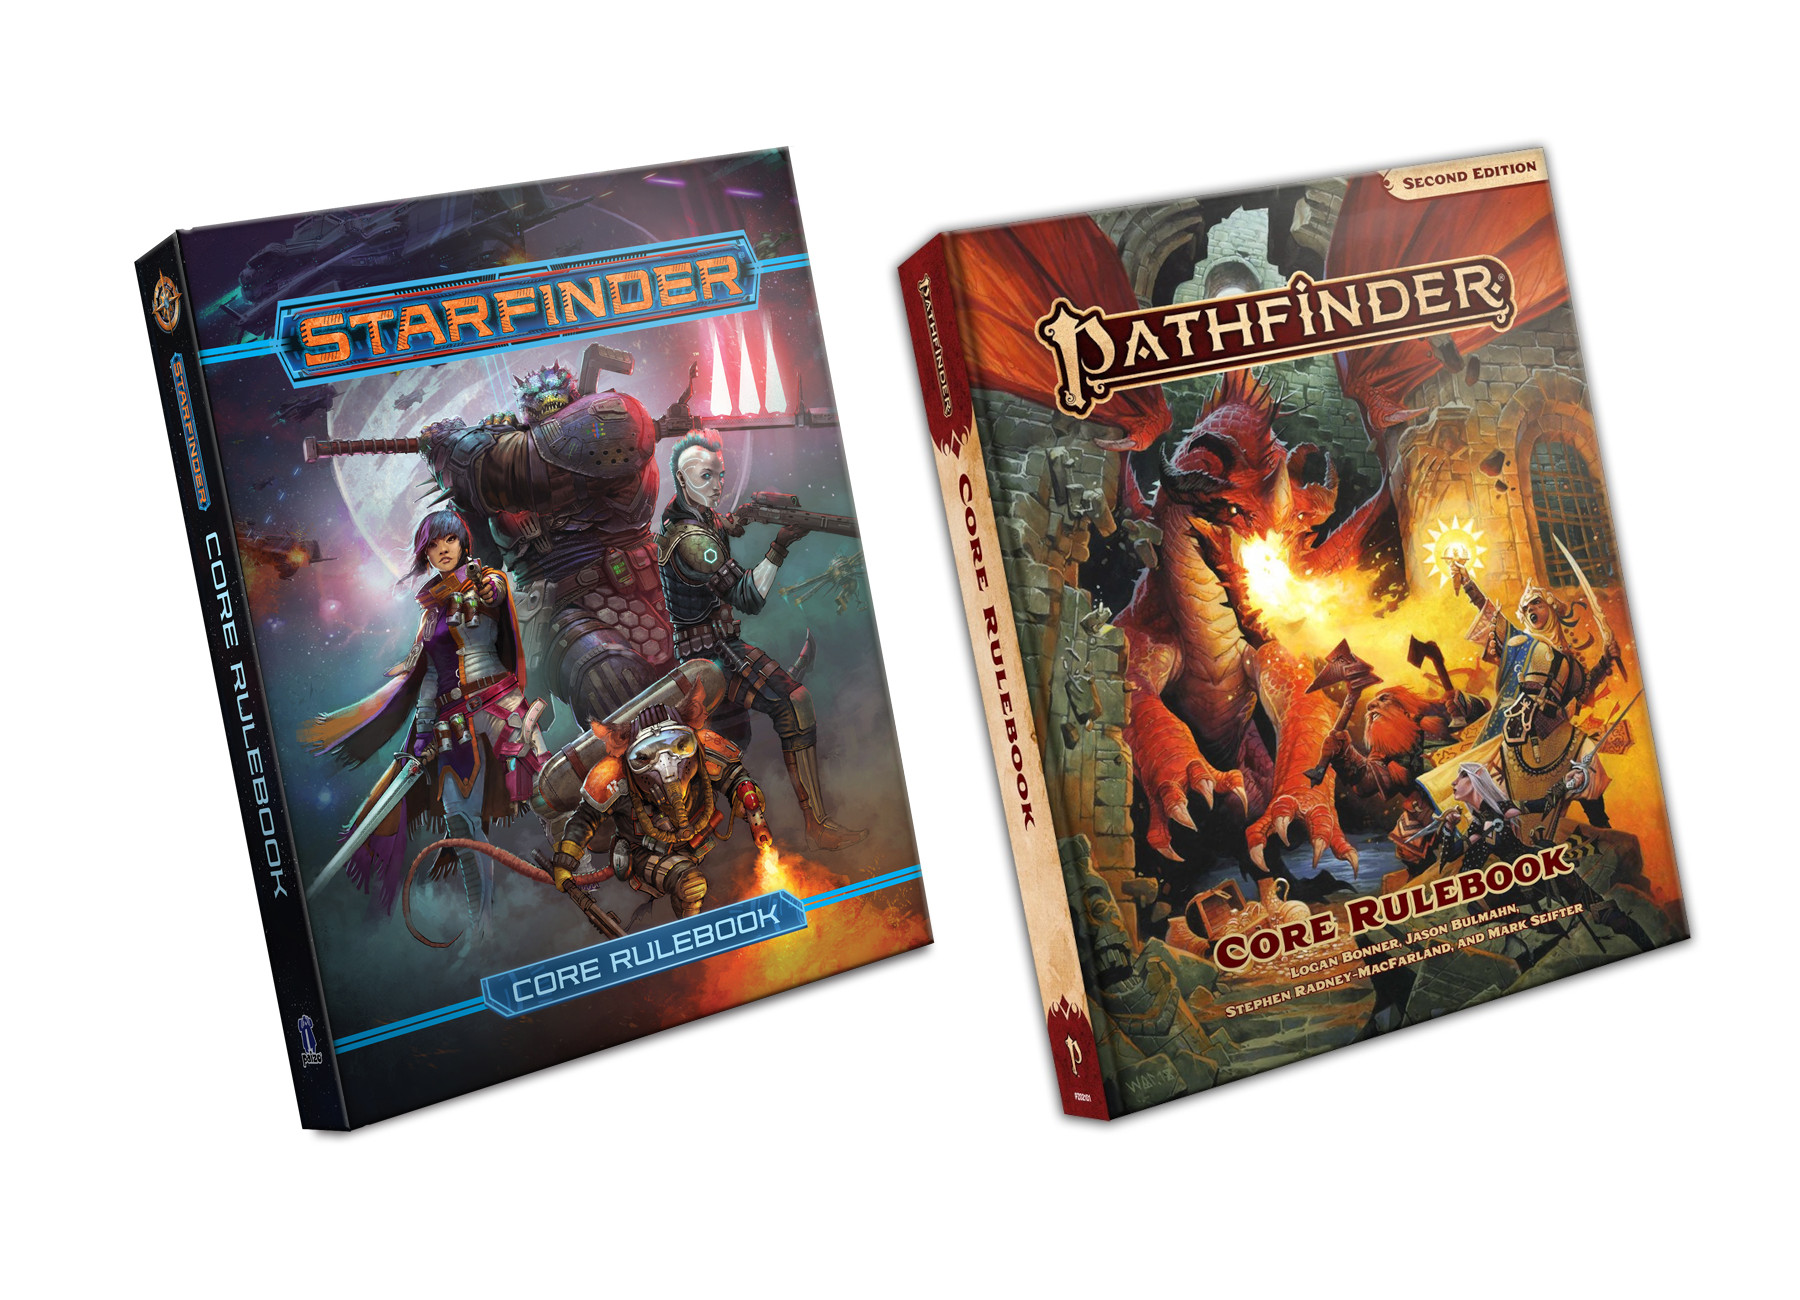 Pathfinder Second Edition Core Rulebook and Starfinder Core Rulebook Digital CD Key, 12.58 usd